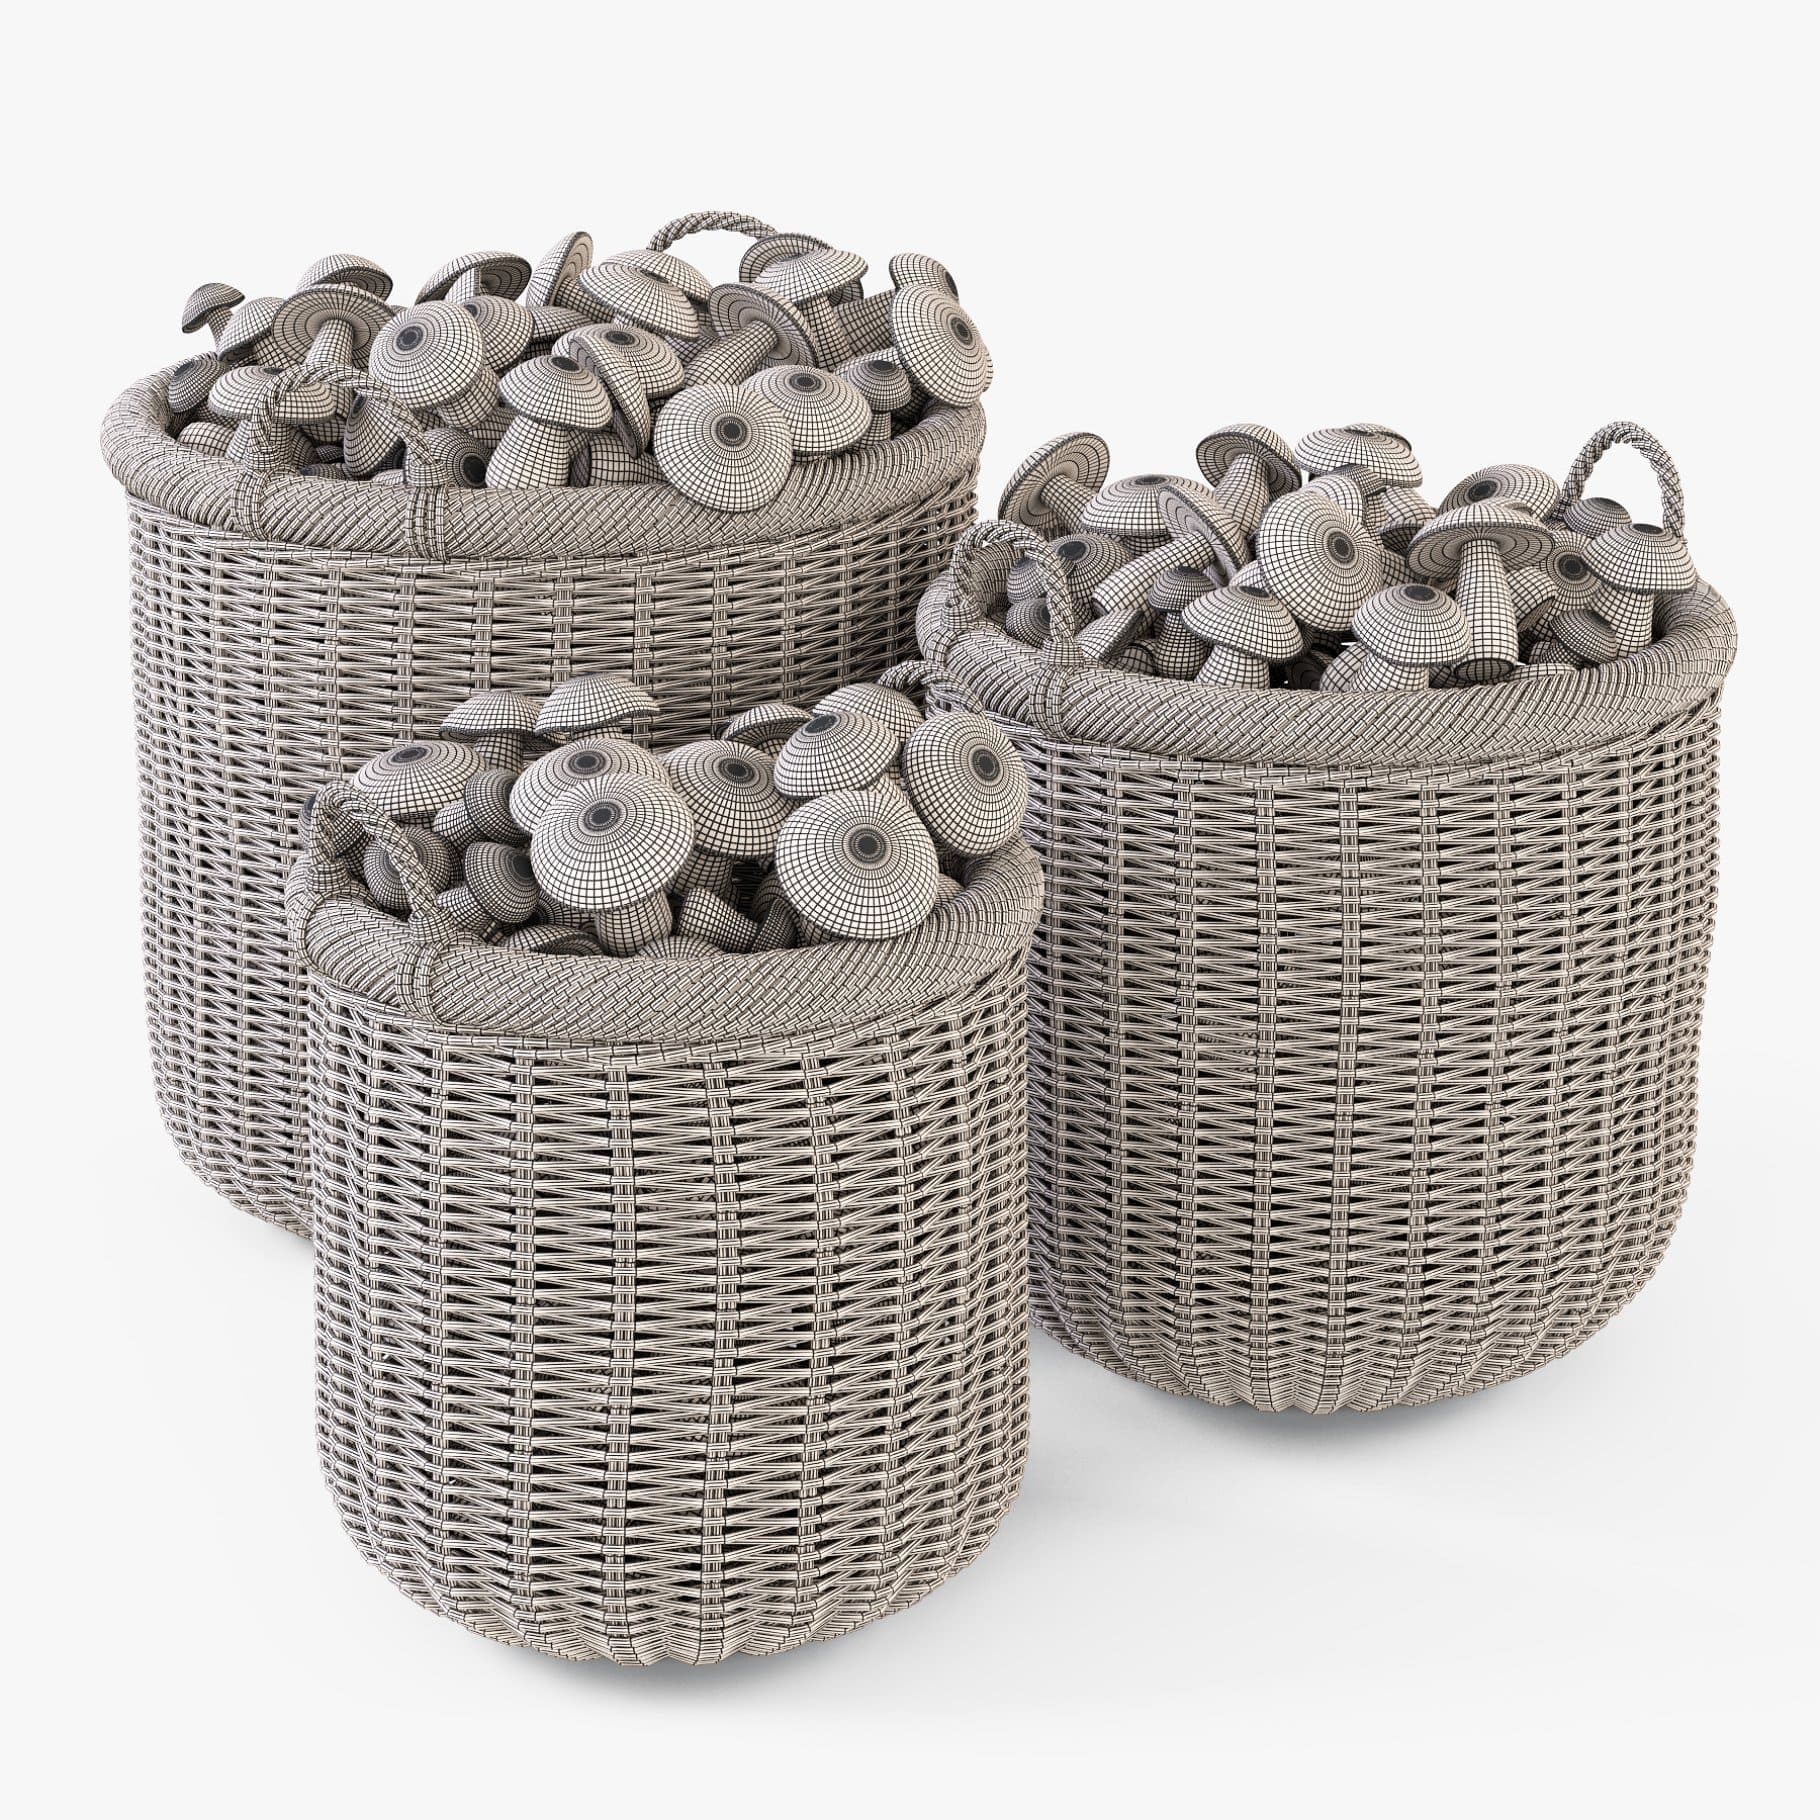 3D models of wicker baskets with mushrooms.